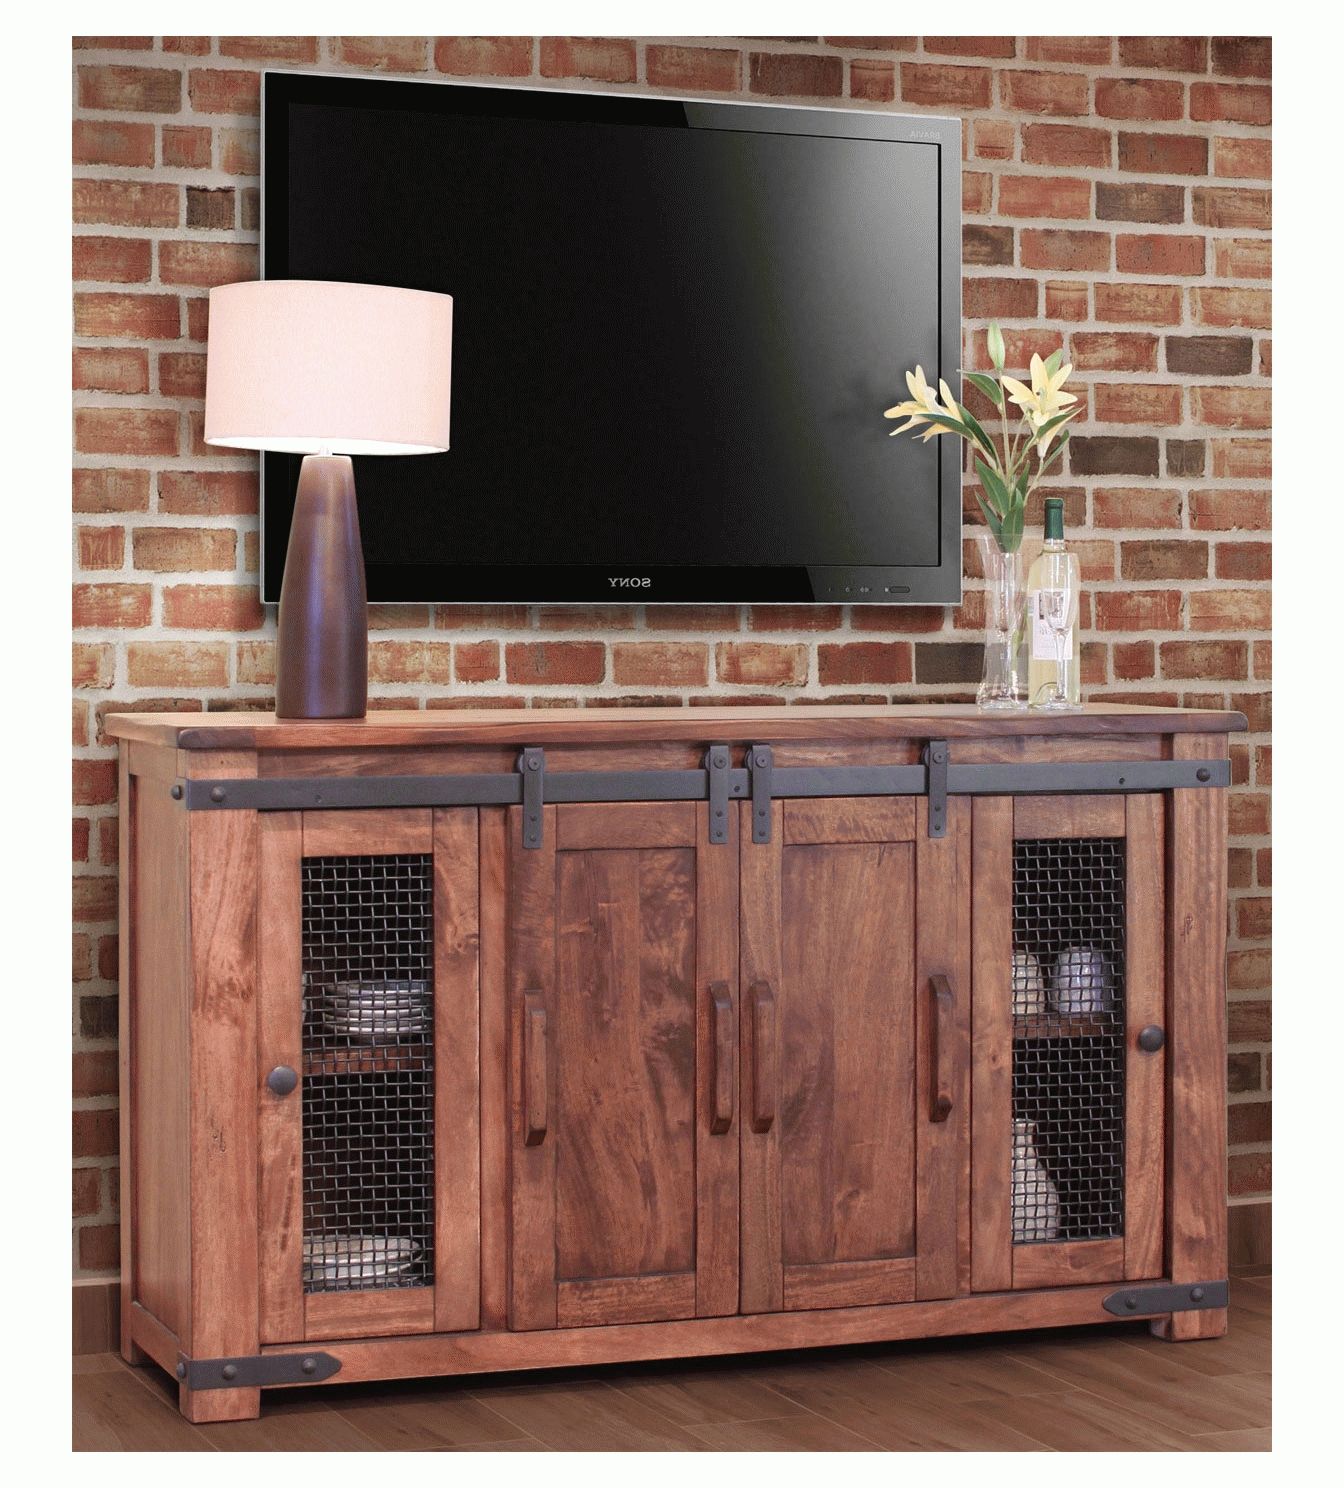 Rustic Barn Door Tv Stand, Barn Door Tv Stand, Barn Door Tv Console Intended For Rustic Furniture Tv Stands (View 9 of 20)